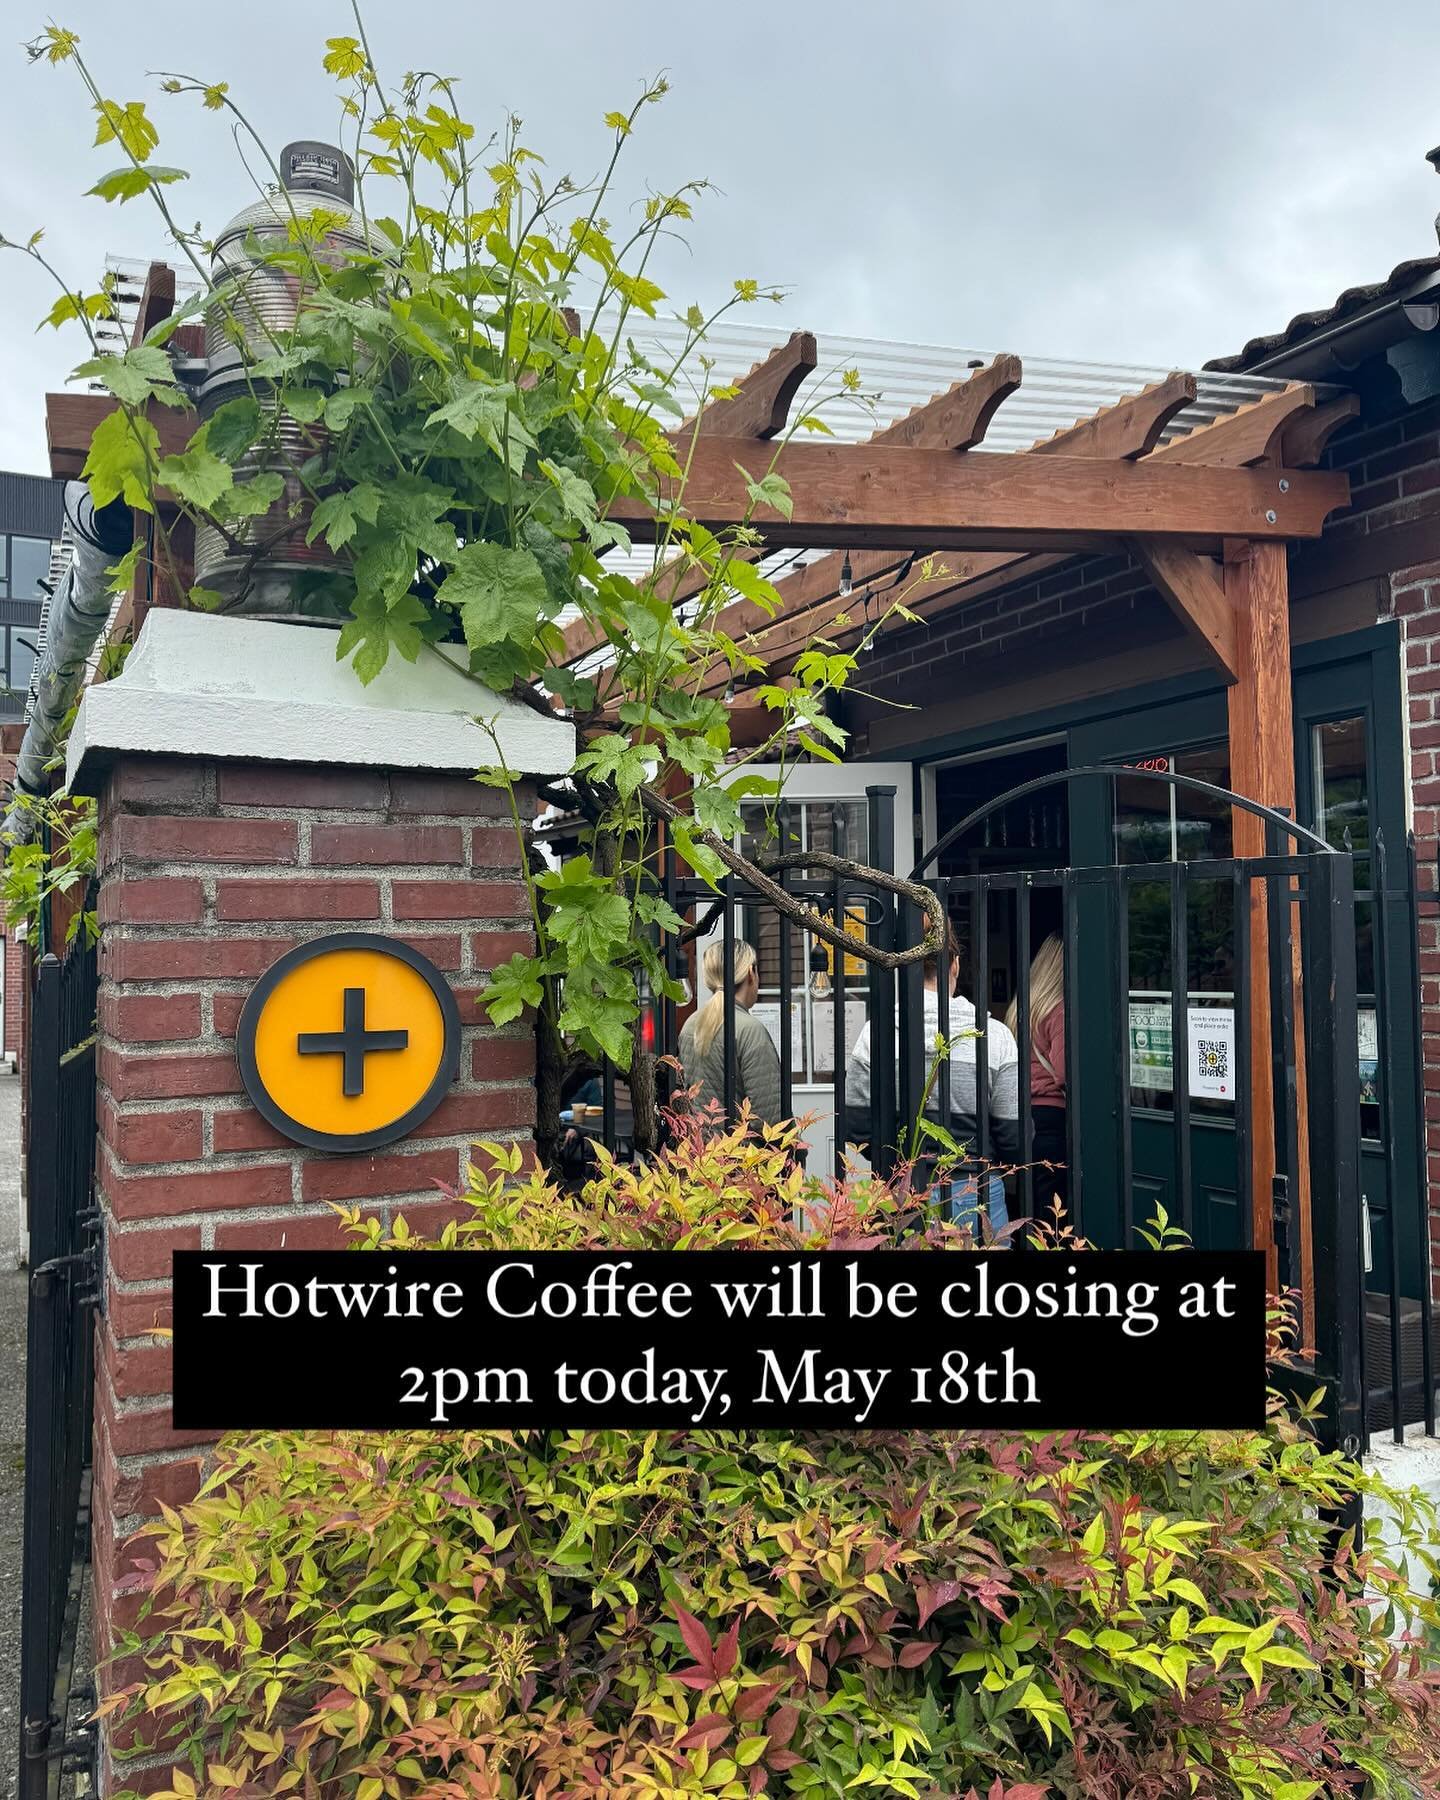 Get caffeinated early today! @hotwirecoffee will be closing at 2pm on Saturday, May 18th. ➕☕️

#hotwire #seattlecoffee #specialsofthemonth #hotwirecoffee #westseattle #coffeeholic #caffeine #igcoffee #icedcoffee #coffeedaily #coffee #coffeetime #coff